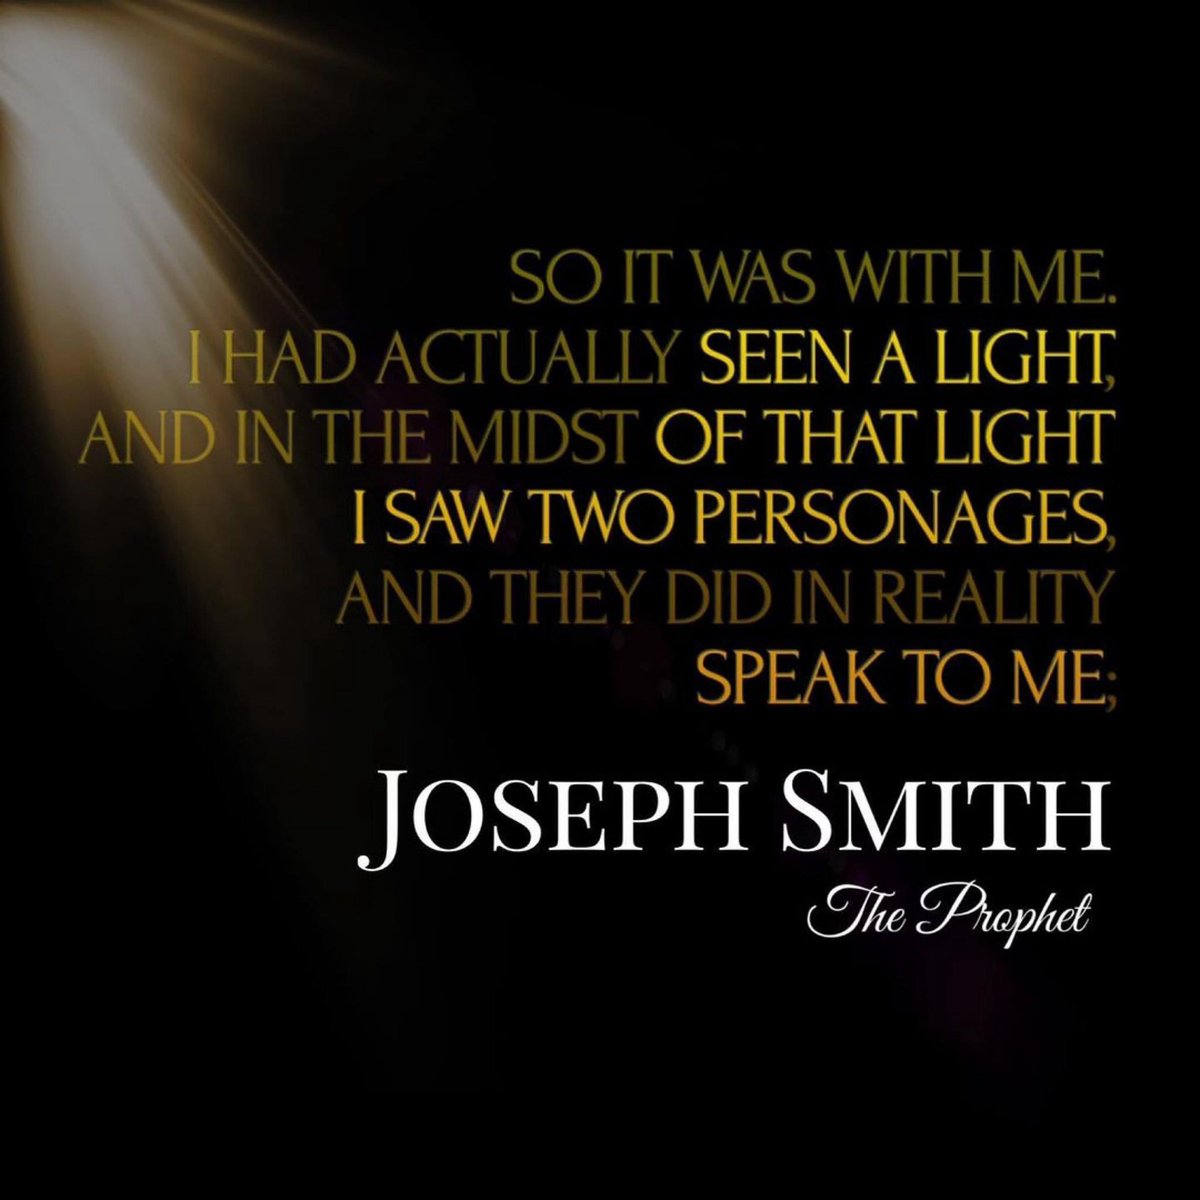 “So it was with me. I had actually seen a light, and in the midst of that light I saw two Personages, and they did in reality speak to me.” ~ Joseph Smith

#TrustGod #CountOnHim #WordOfGod #HearHim #ShareGoodness #ChildrenOfGod #TheChurchOfJesusChristOfLatterDaySaints